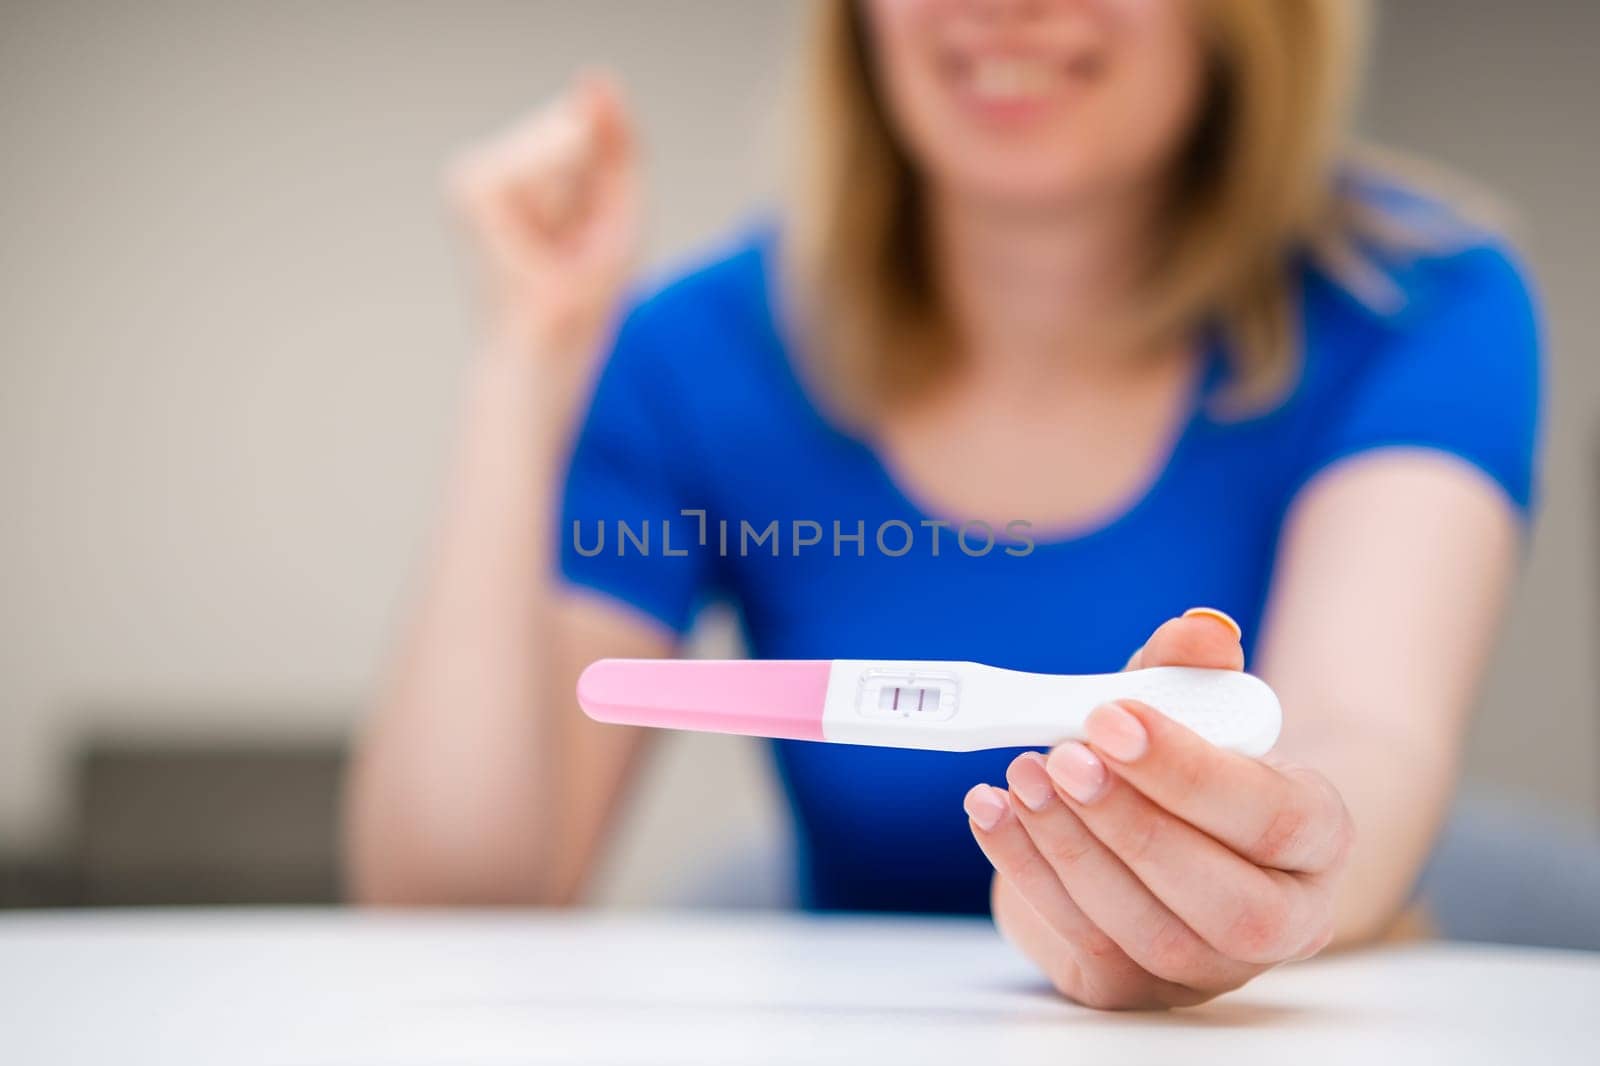 Say yes after getting positive pregnancy test by vladimka